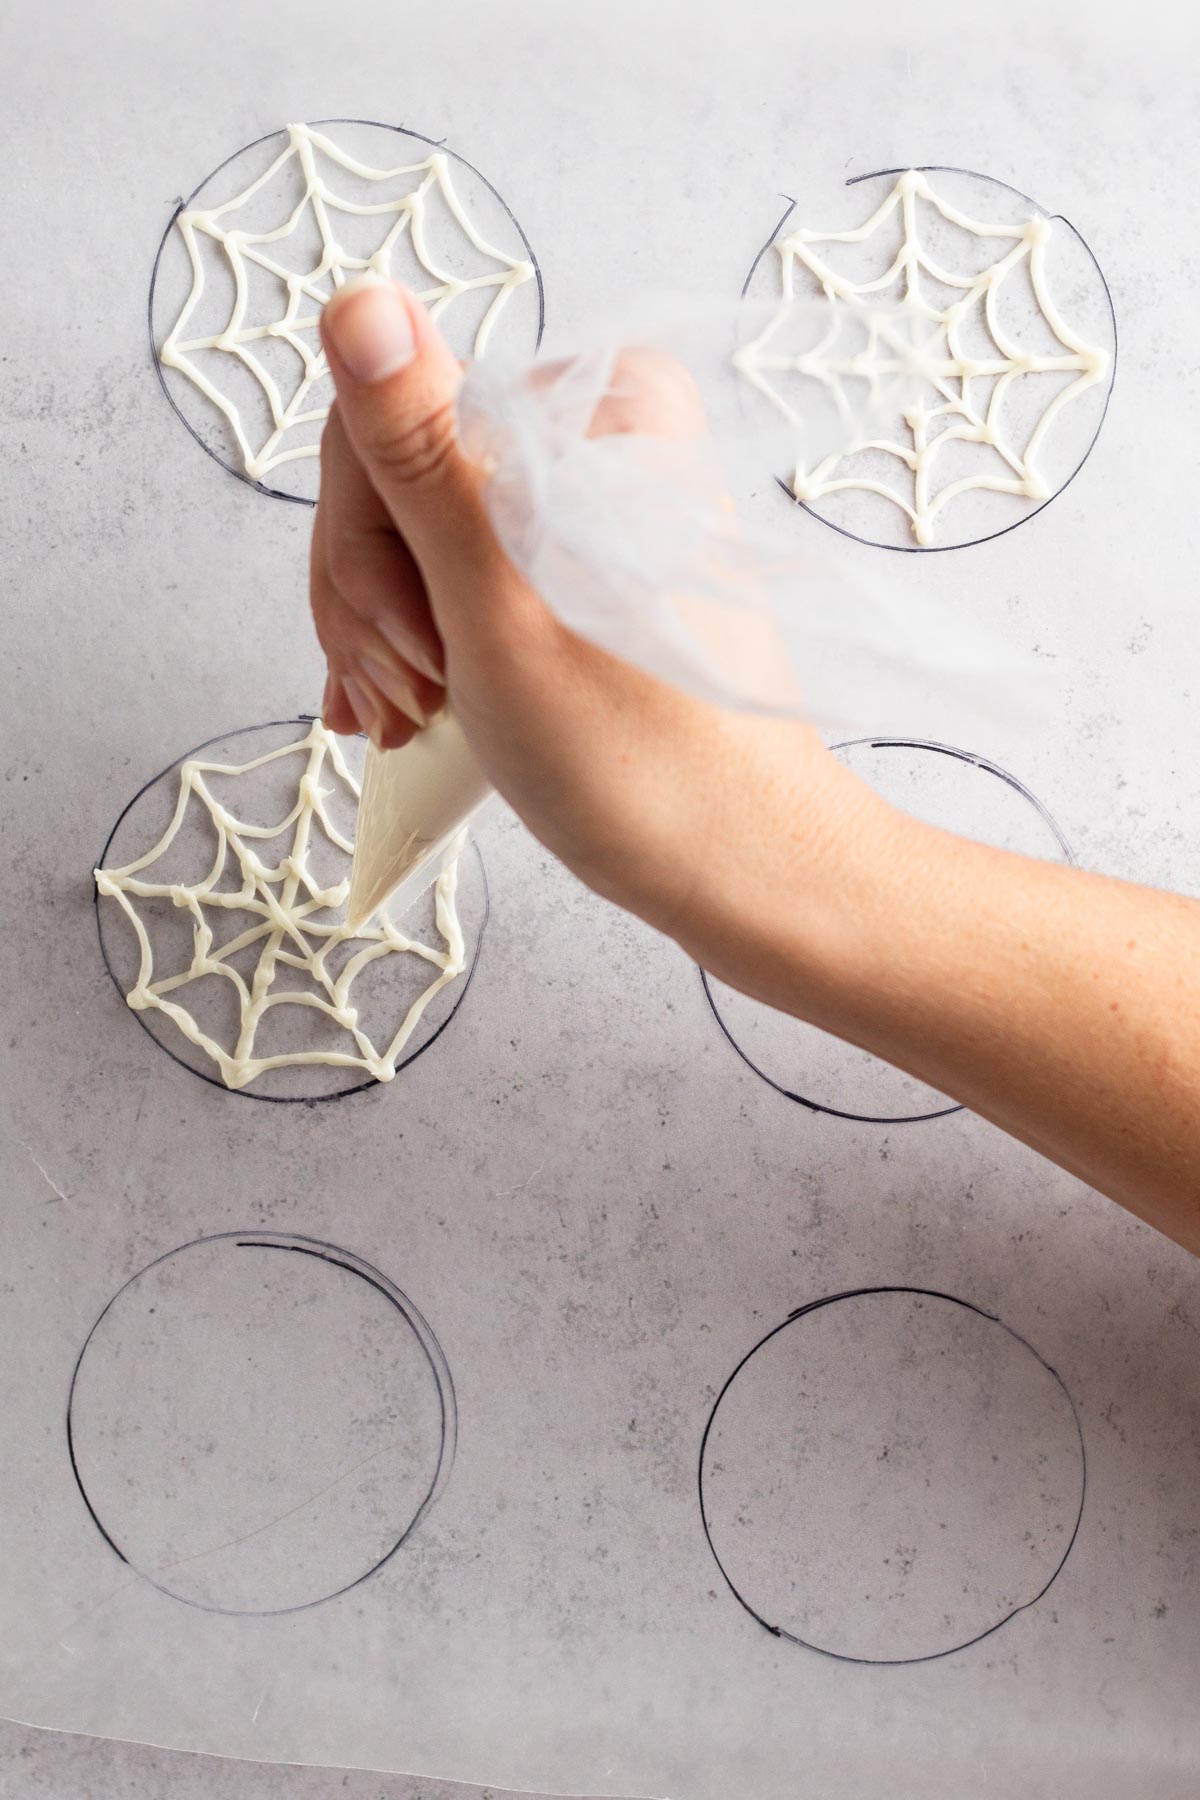 Hand piping swooped lines of melted white chocolate onto wax paper to complete a spiderweb pattern.